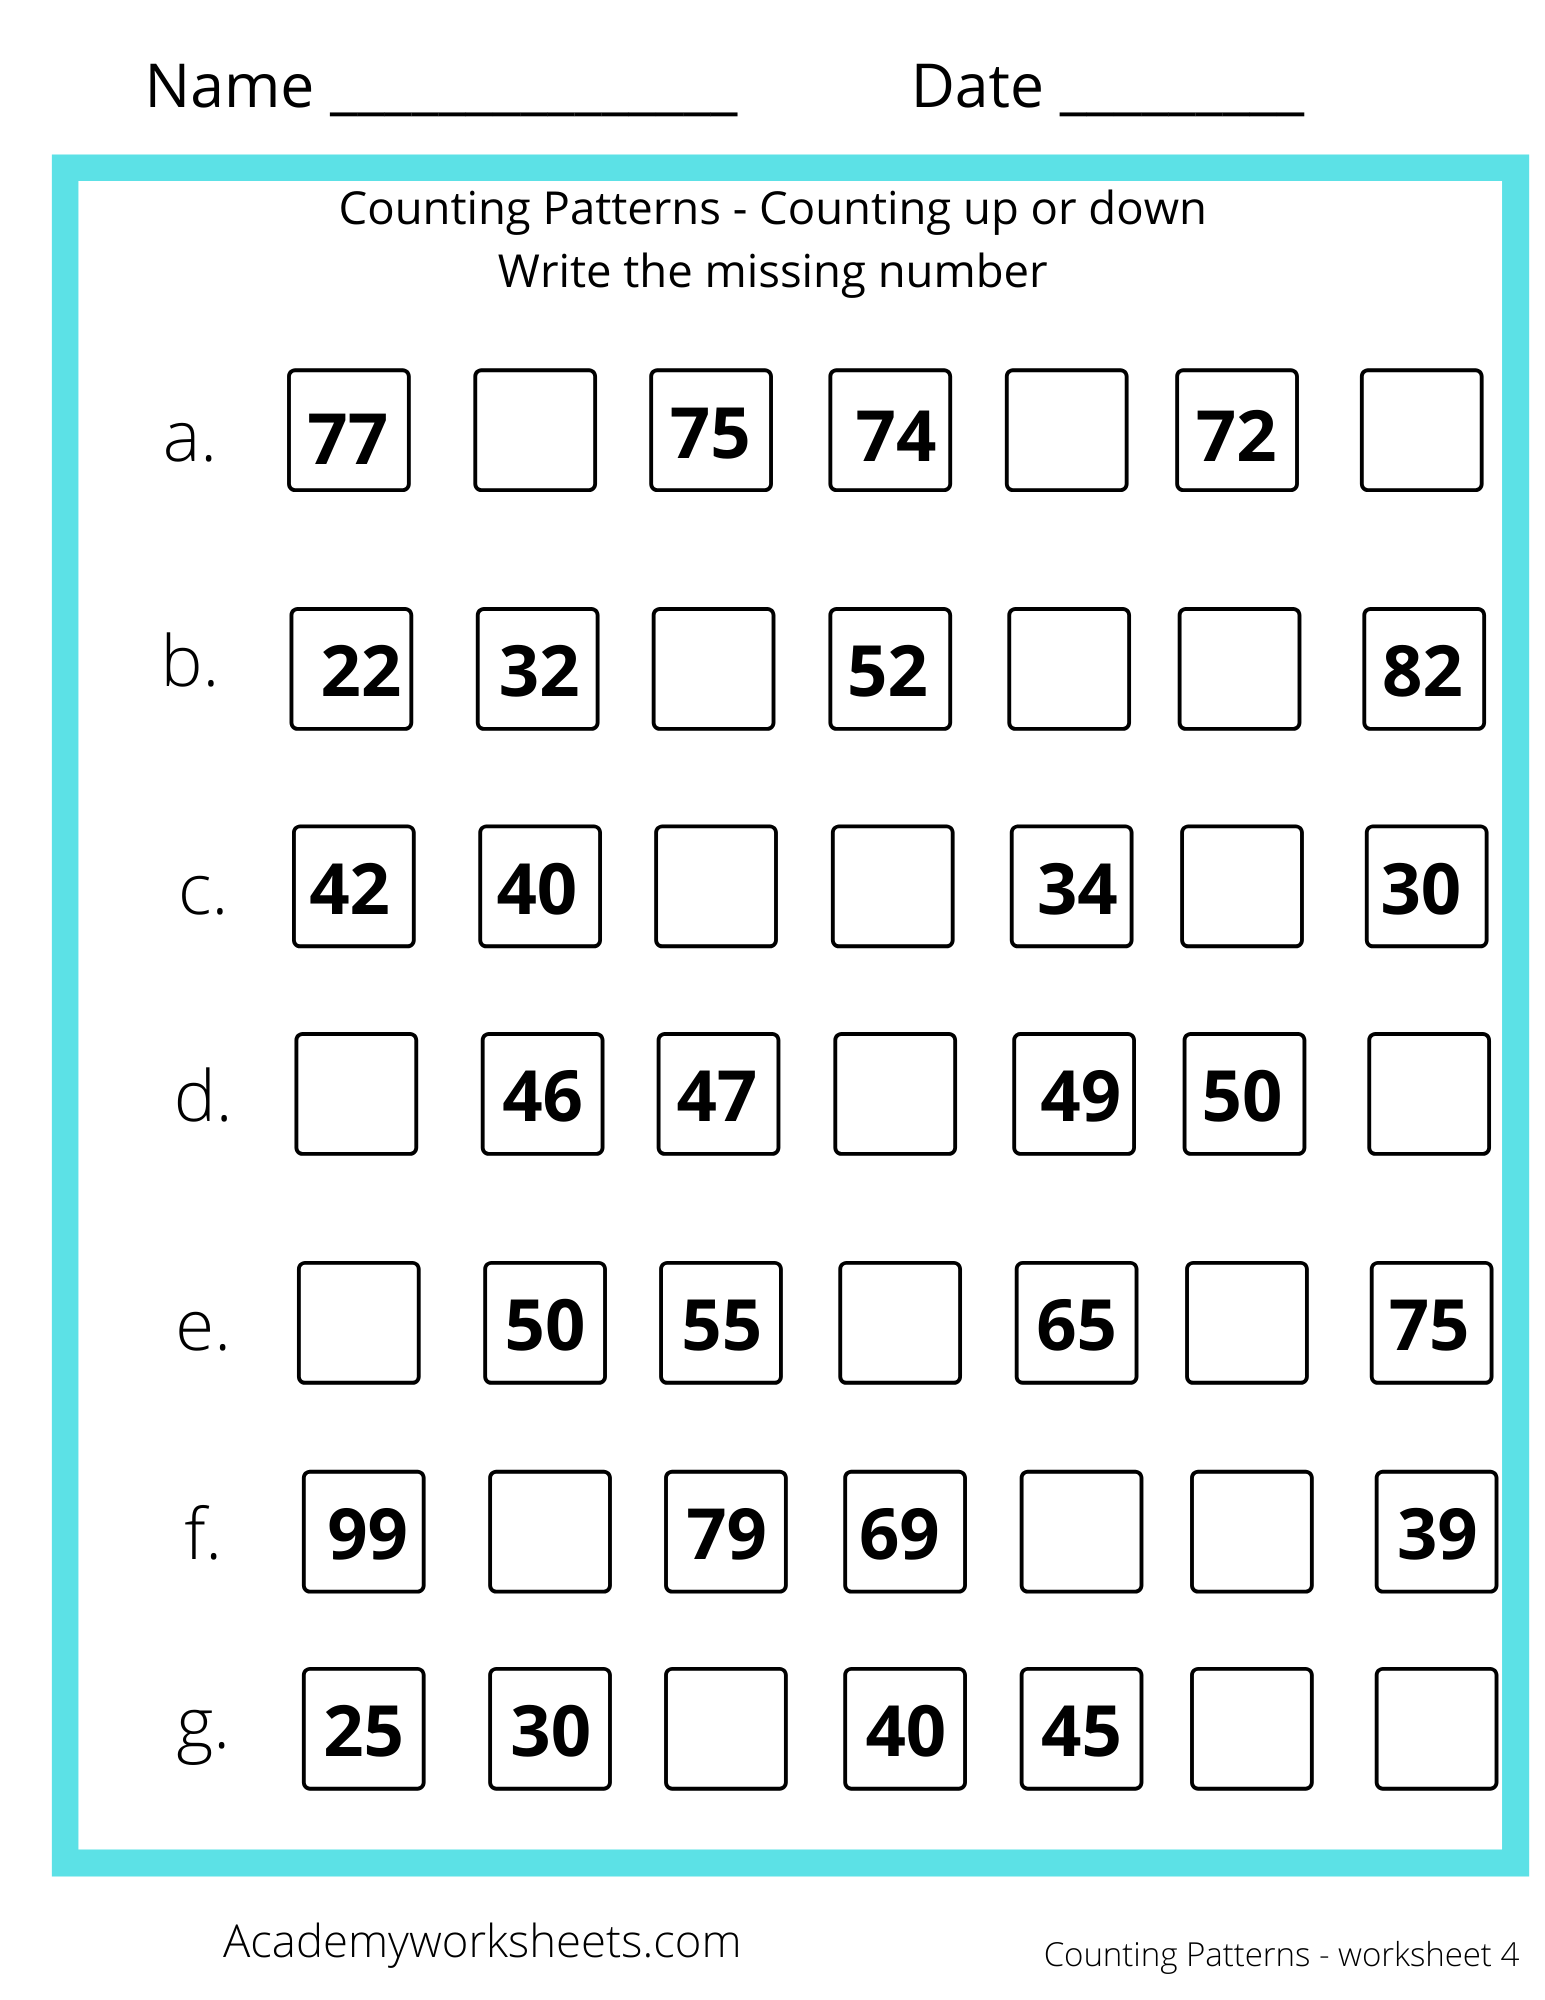 Counting Patterns Math Worksheets - Academy Worksheets